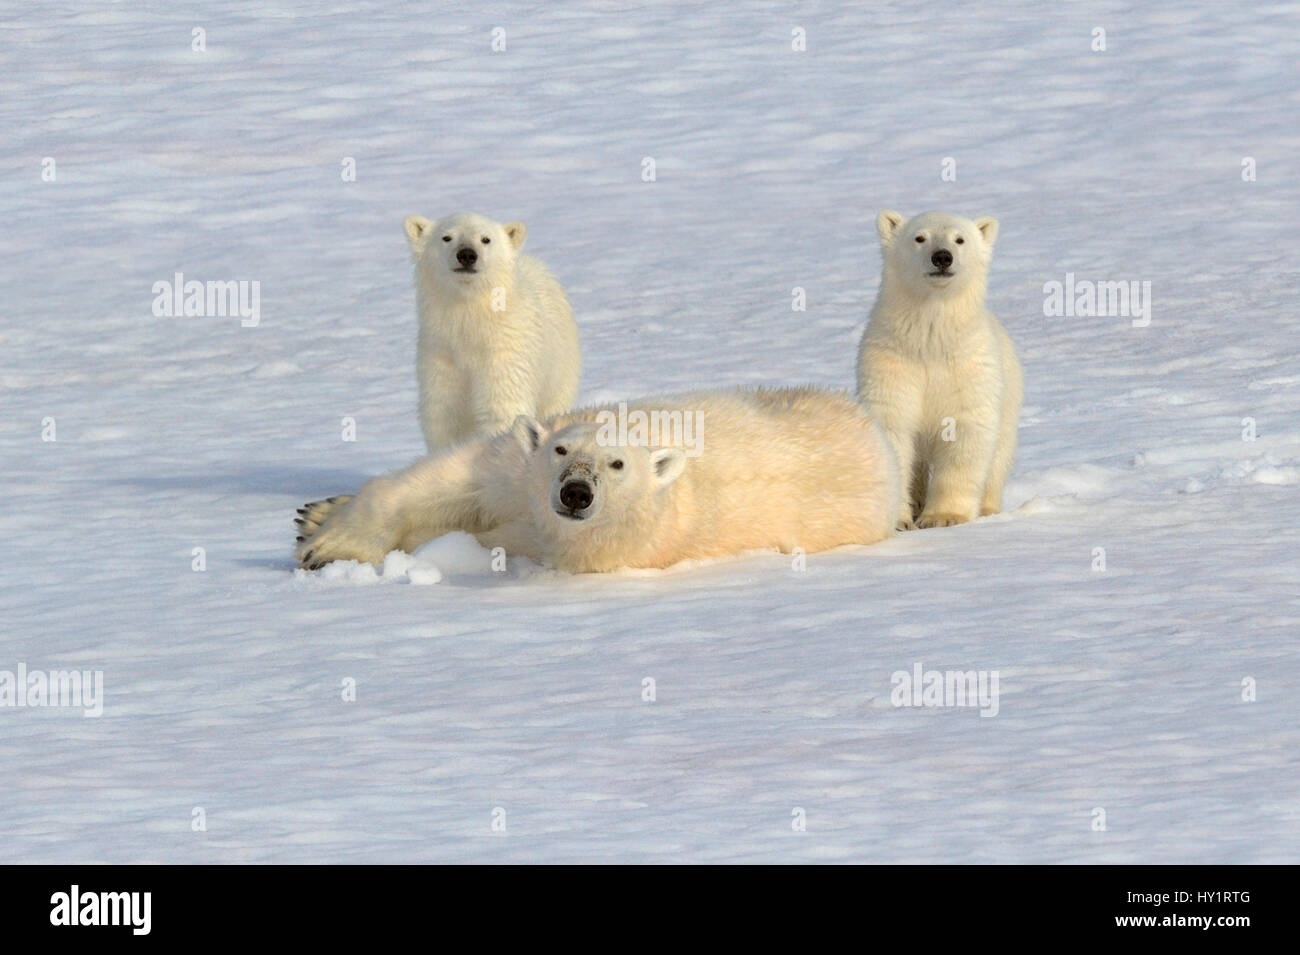 Polar bear (Ursus maritimus) mother rolling in snow with new year cubs, 6 months,  Svalbard, Norway. July 2007.  Endangered species. Stock Photo